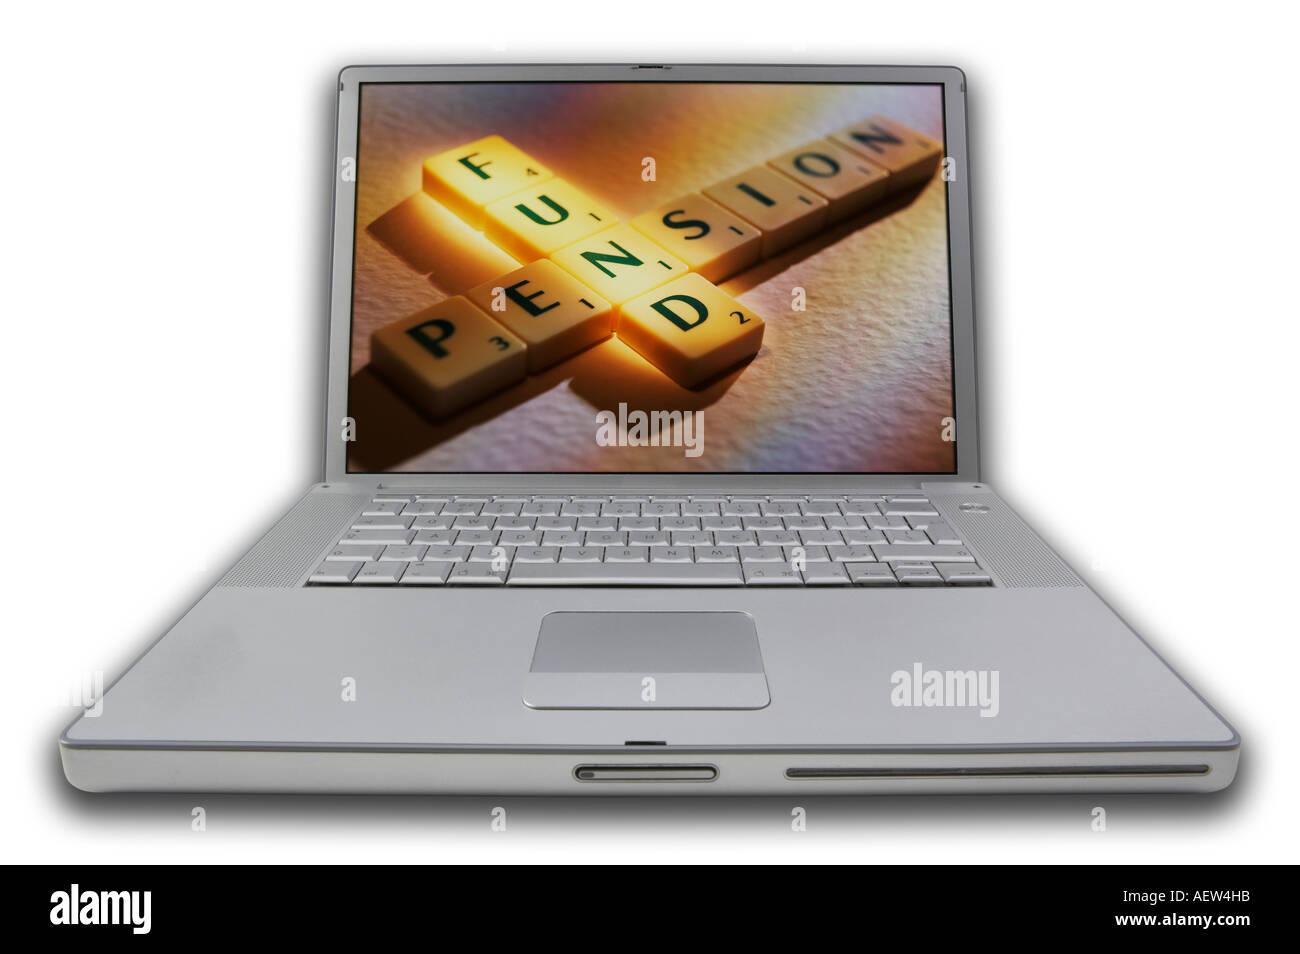 LAP TOP COMPUTER WITH SCRABBLE LETTERS ON SCREEN SPELLING WORDS PENSION FUND Stock Photo